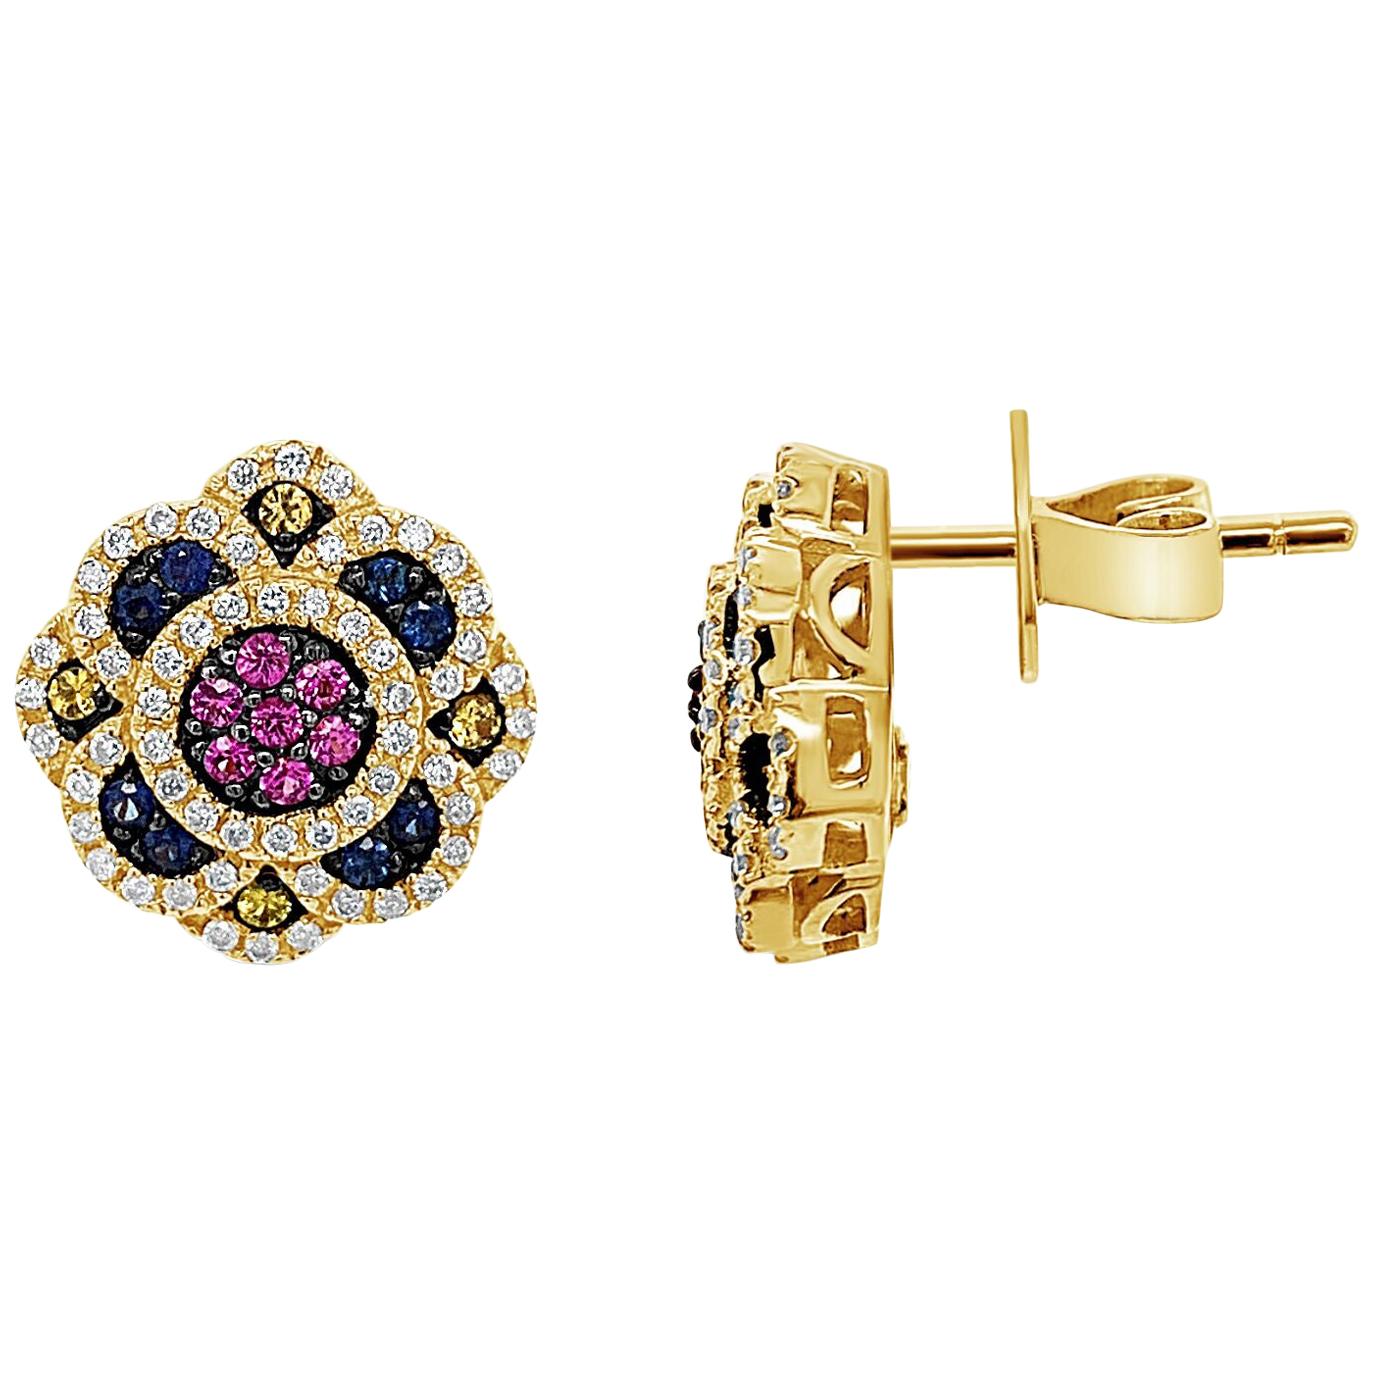 Le Vian Multi-Color and White Diamond Earrings Set in 14 Karat Yellow Gold